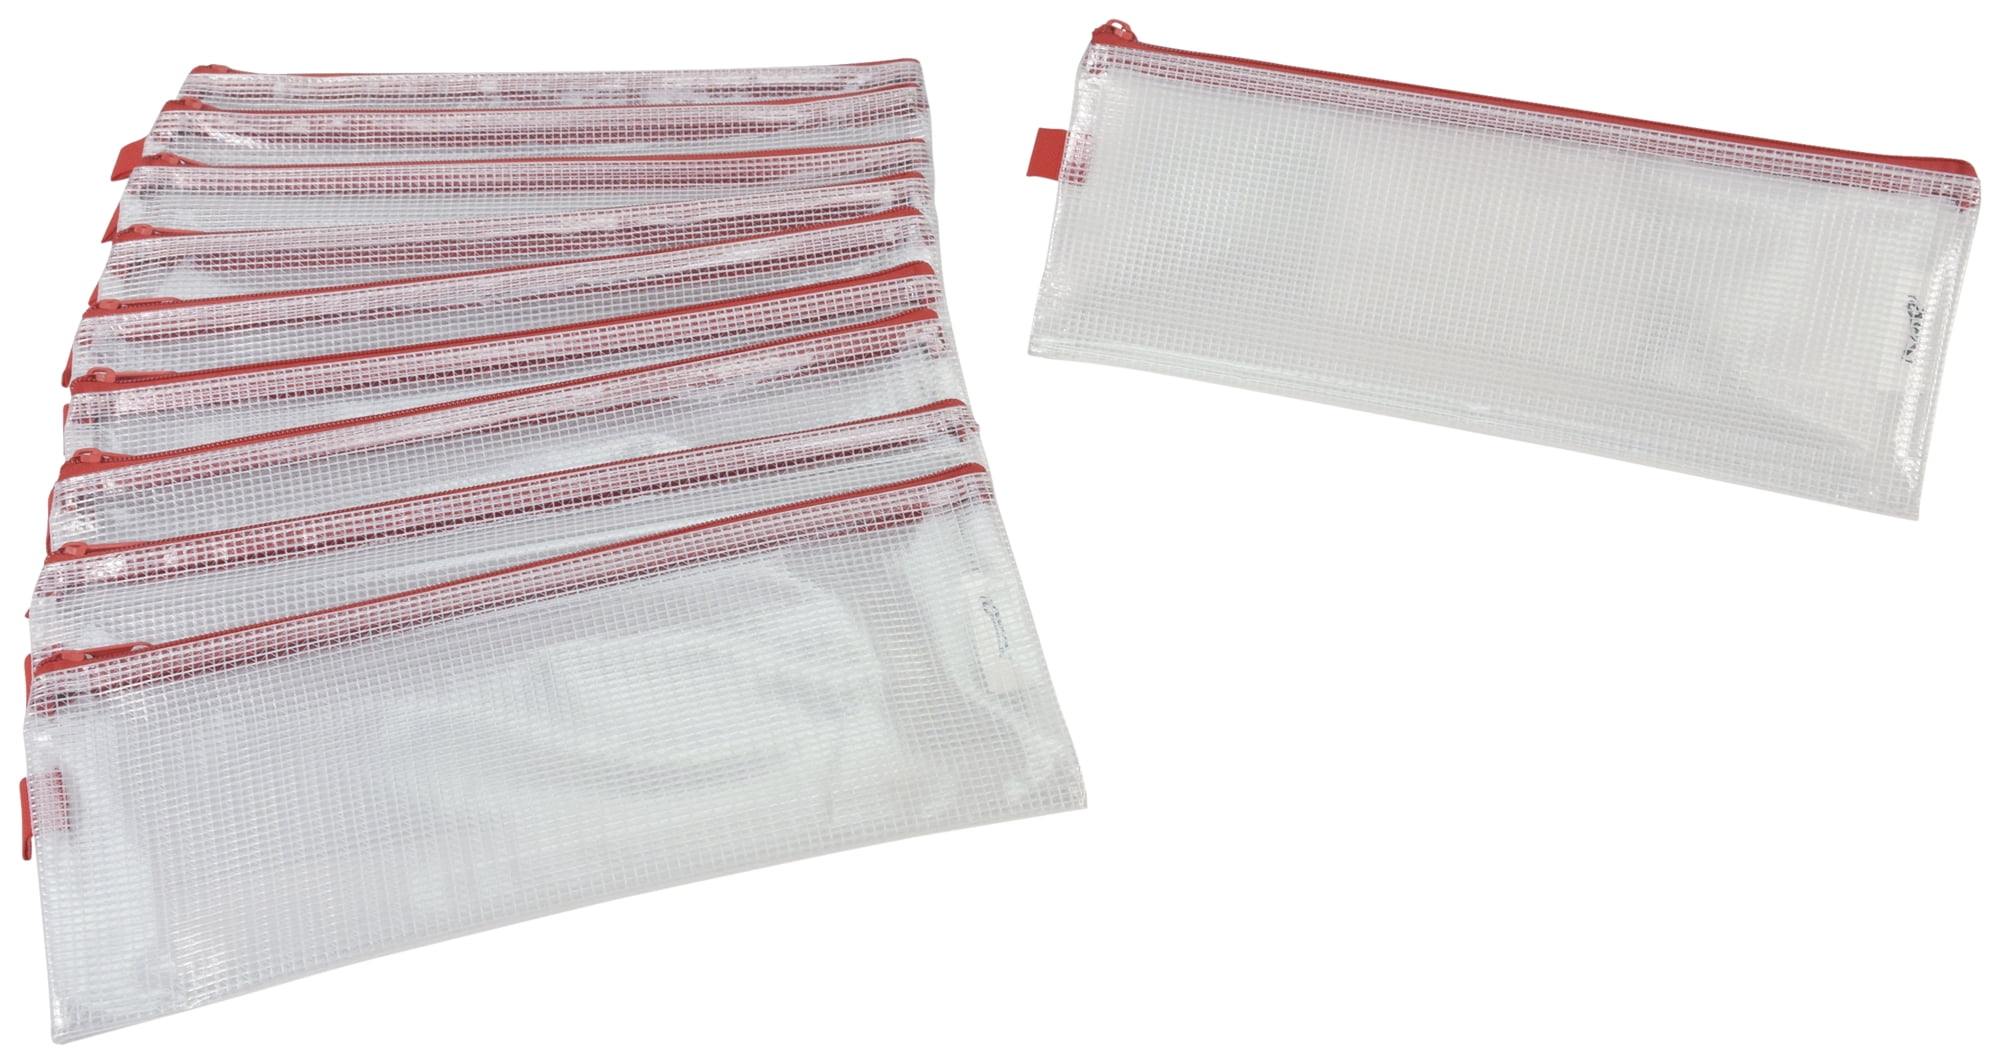 Sax 5 x 9 in. Mesh Zippered Bag, Clear with Black Trim - Pack of 10